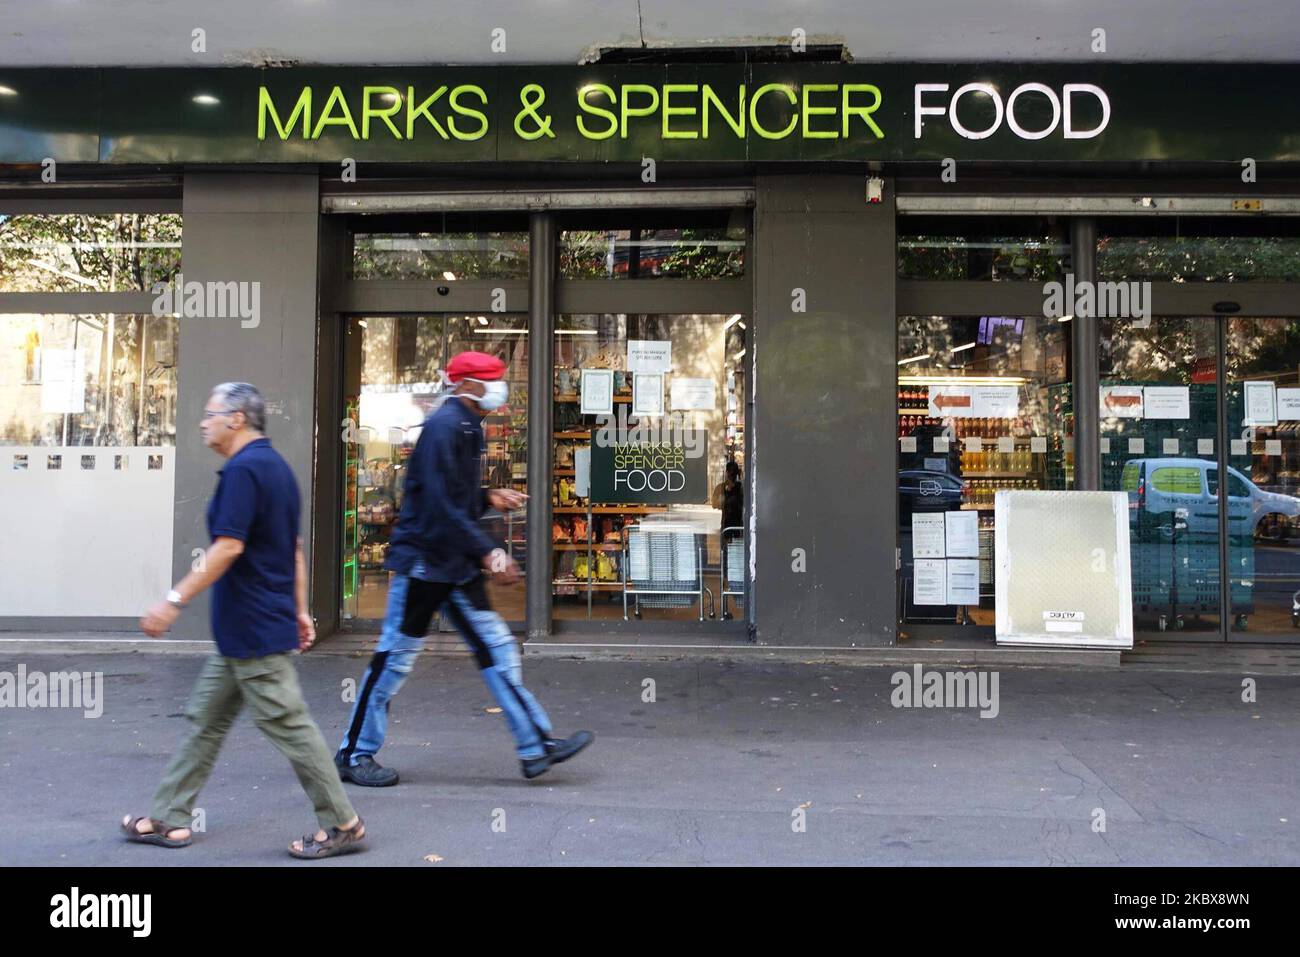 A Marks And Spencer supermarket in Paris, France on August 18, 2020. The  british retail chain Marks And Spencer announced on Tuesday August 18, to  cut 7,000 jobs over the next three